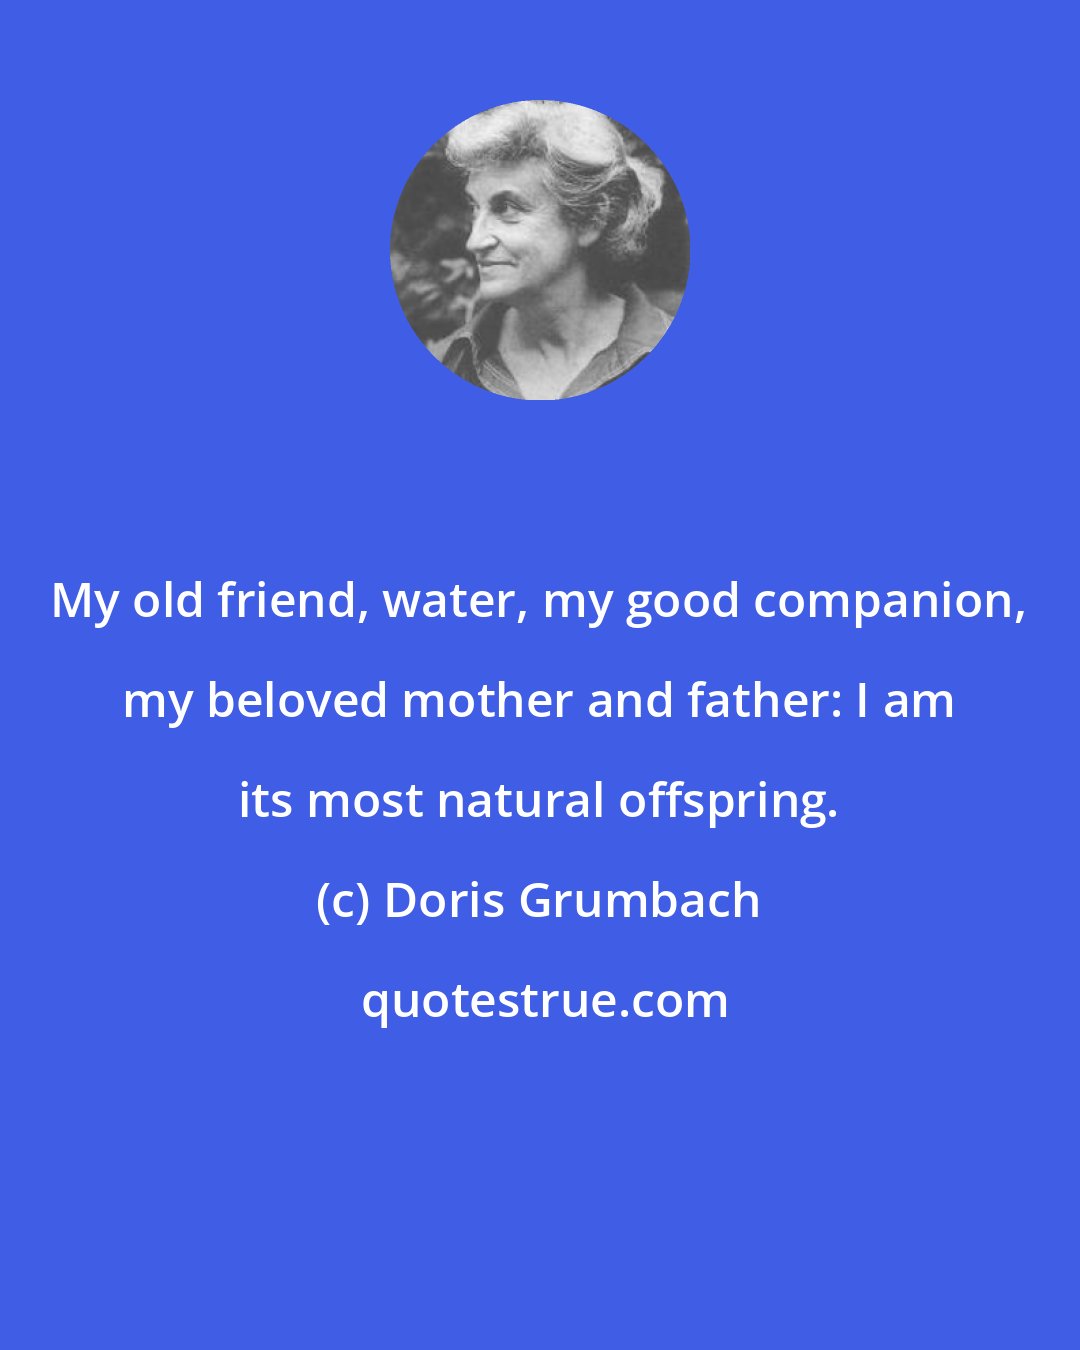 Doris Grumbach: My old friend, water, my good companion, my beloved mother and father: I am its most natural offspring.